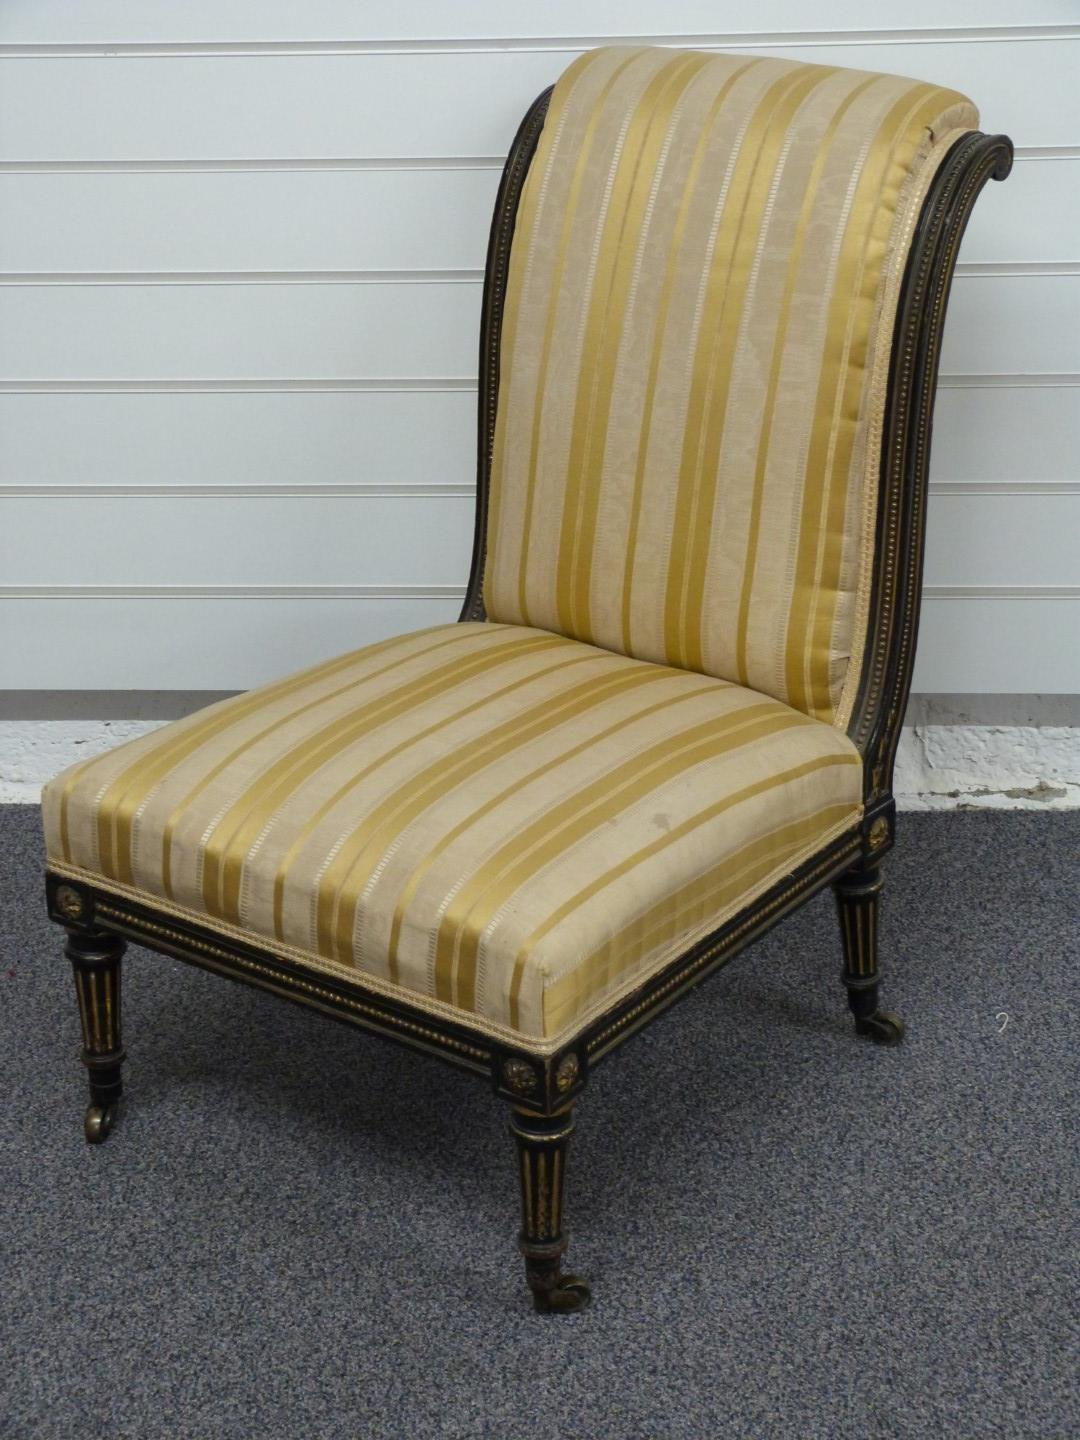 A 19thC upholstered nursing chair with ebonised and gilt decoration